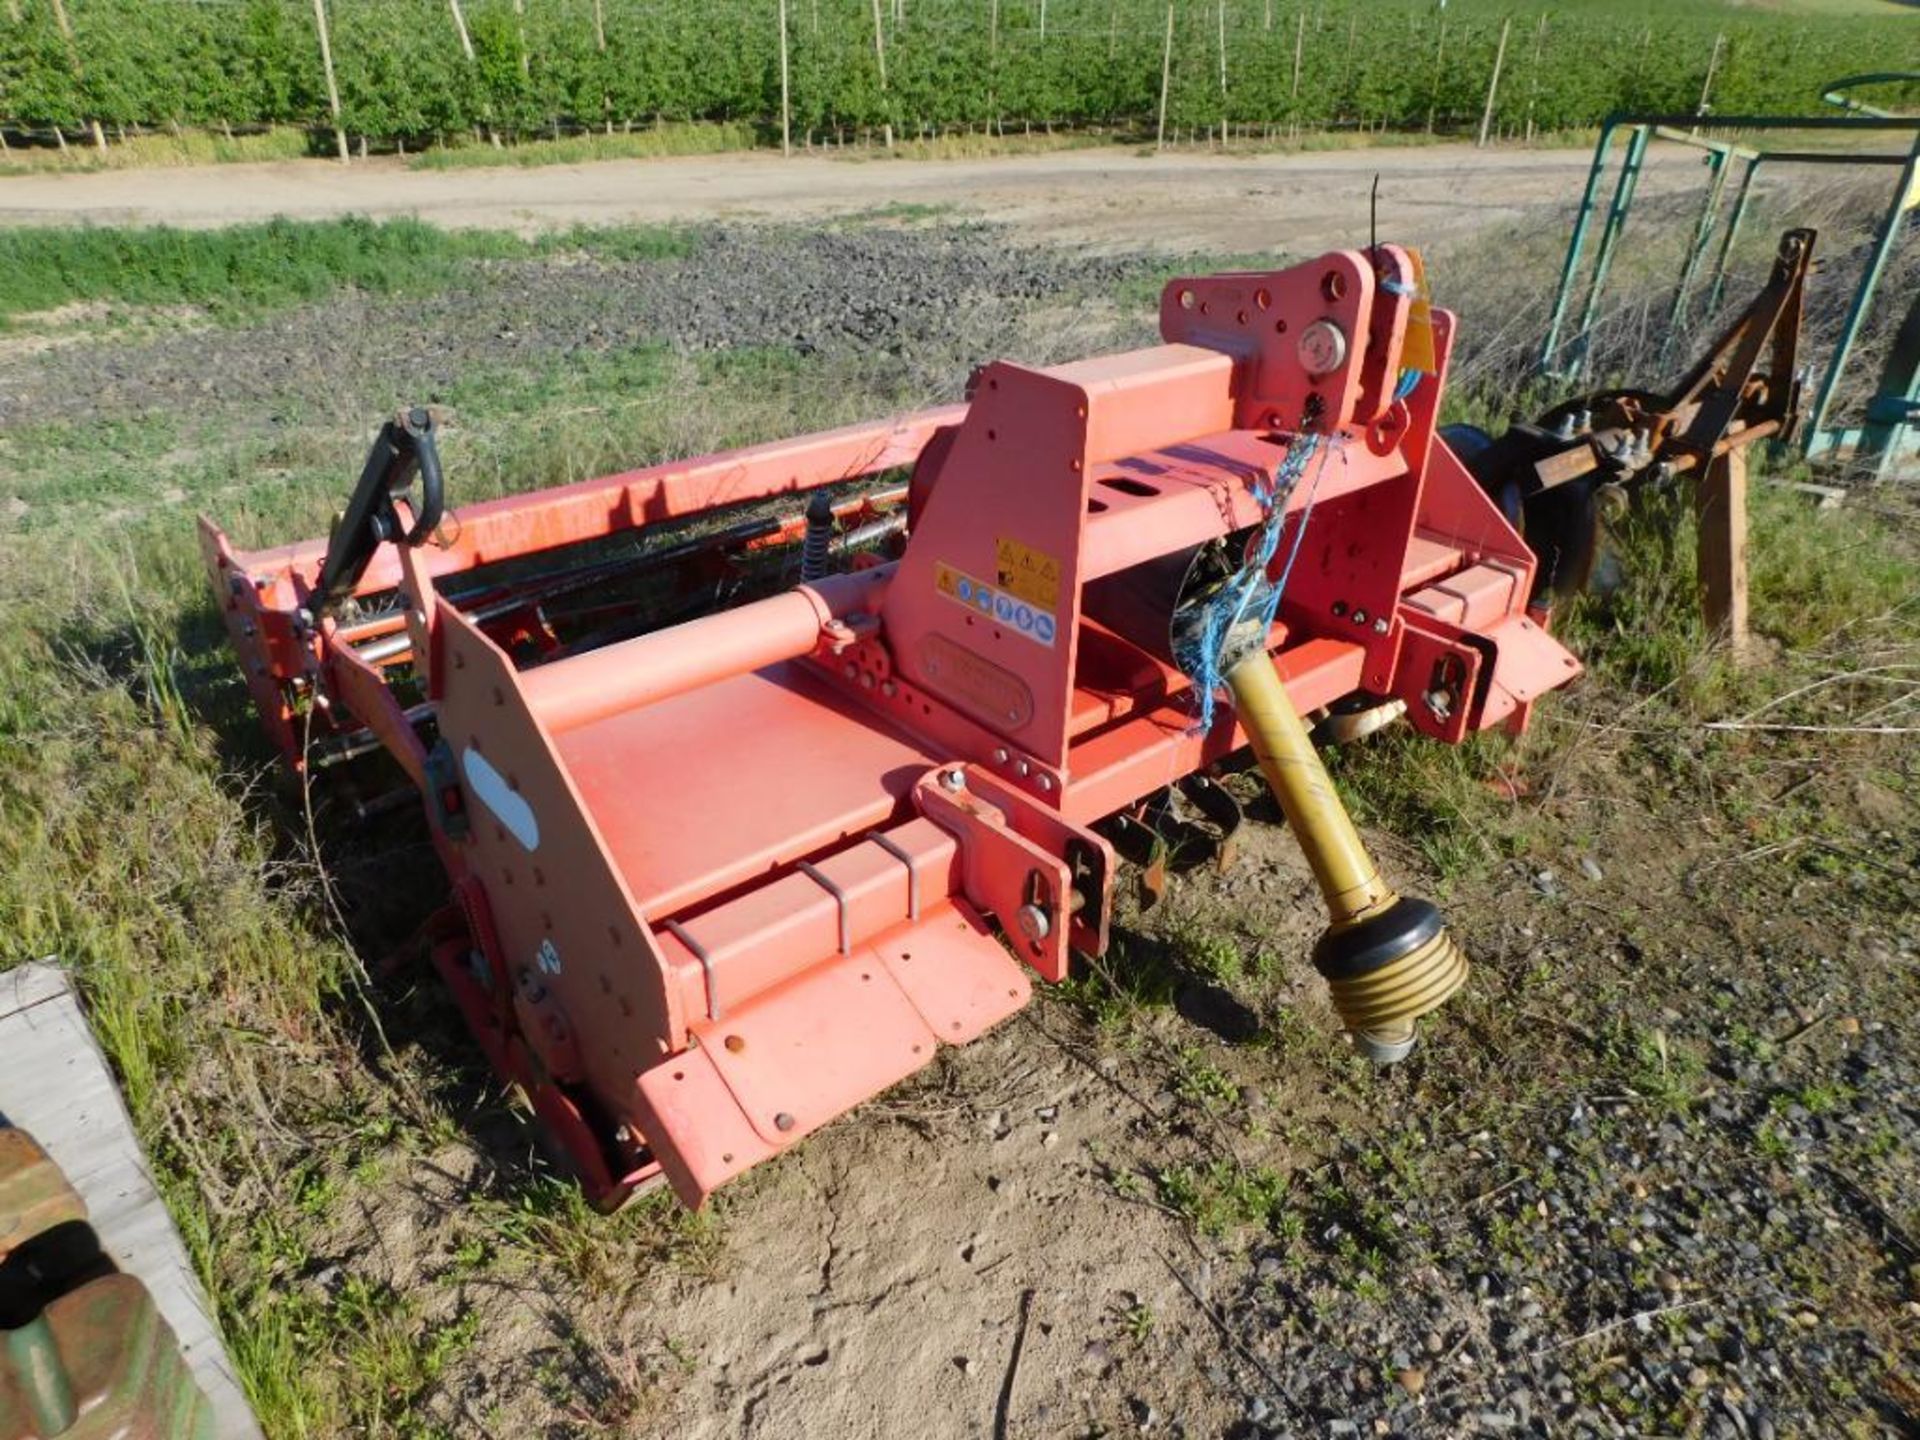 2012 Maschio C180 PTO Driven Rototiller, S/N 129510742 (LOCATED IN MAINTENANCE AREA) - Image 2 of 5